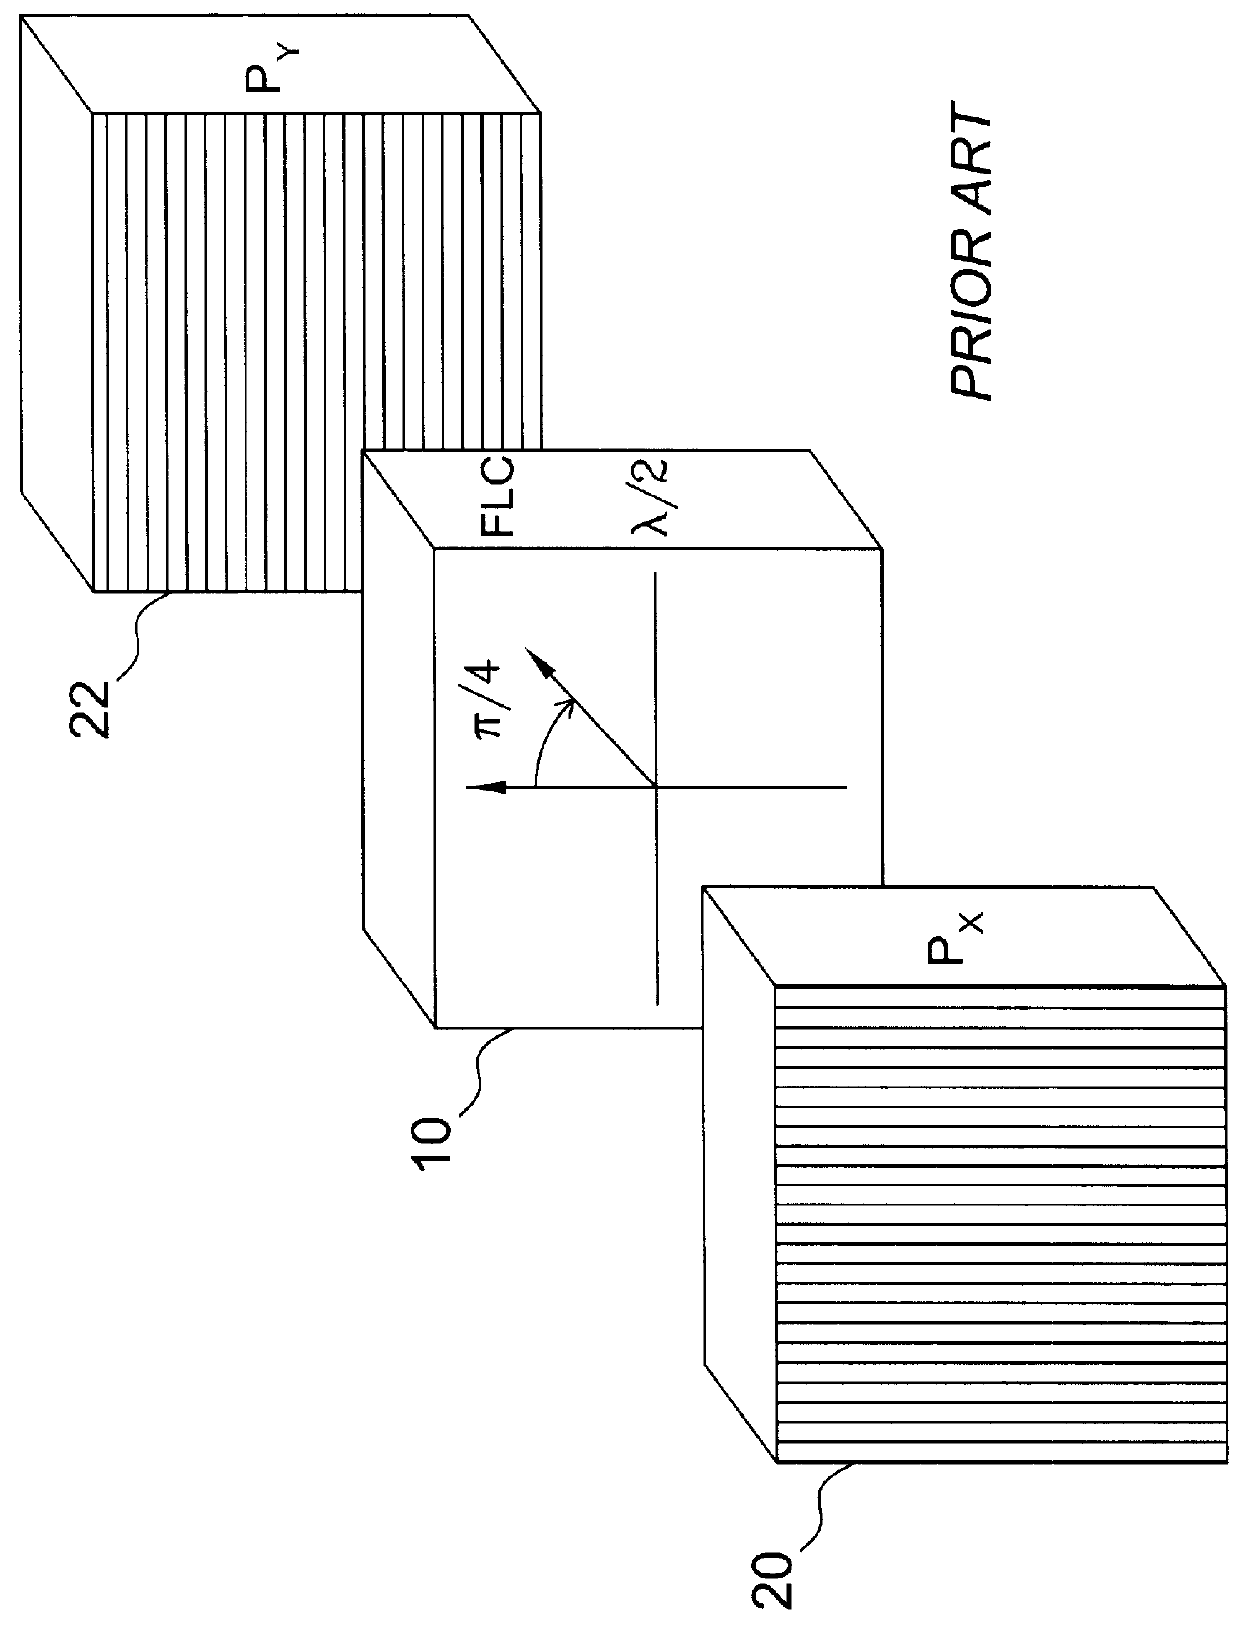 Spatially switched achromatic compound retarder